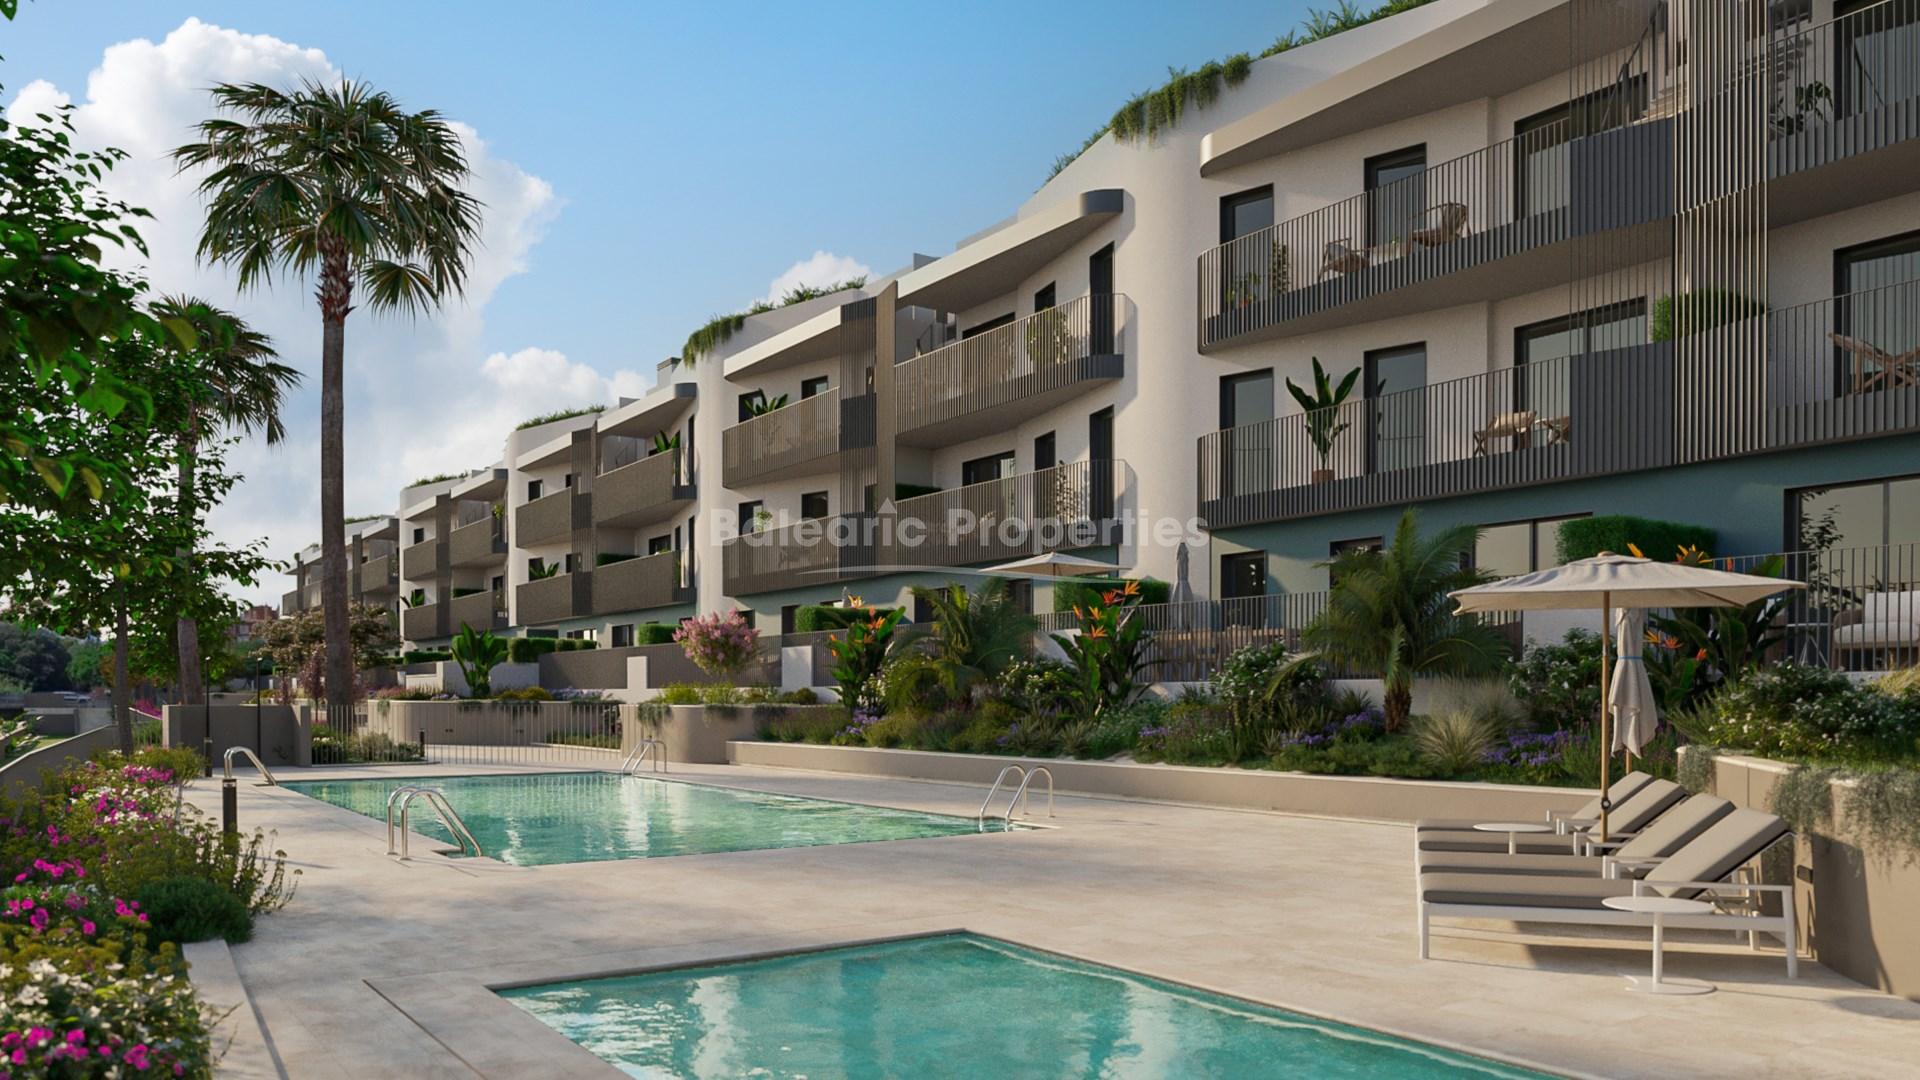 Attractive new apartments with excellent facilities for sale in Marratxi, Mallorca